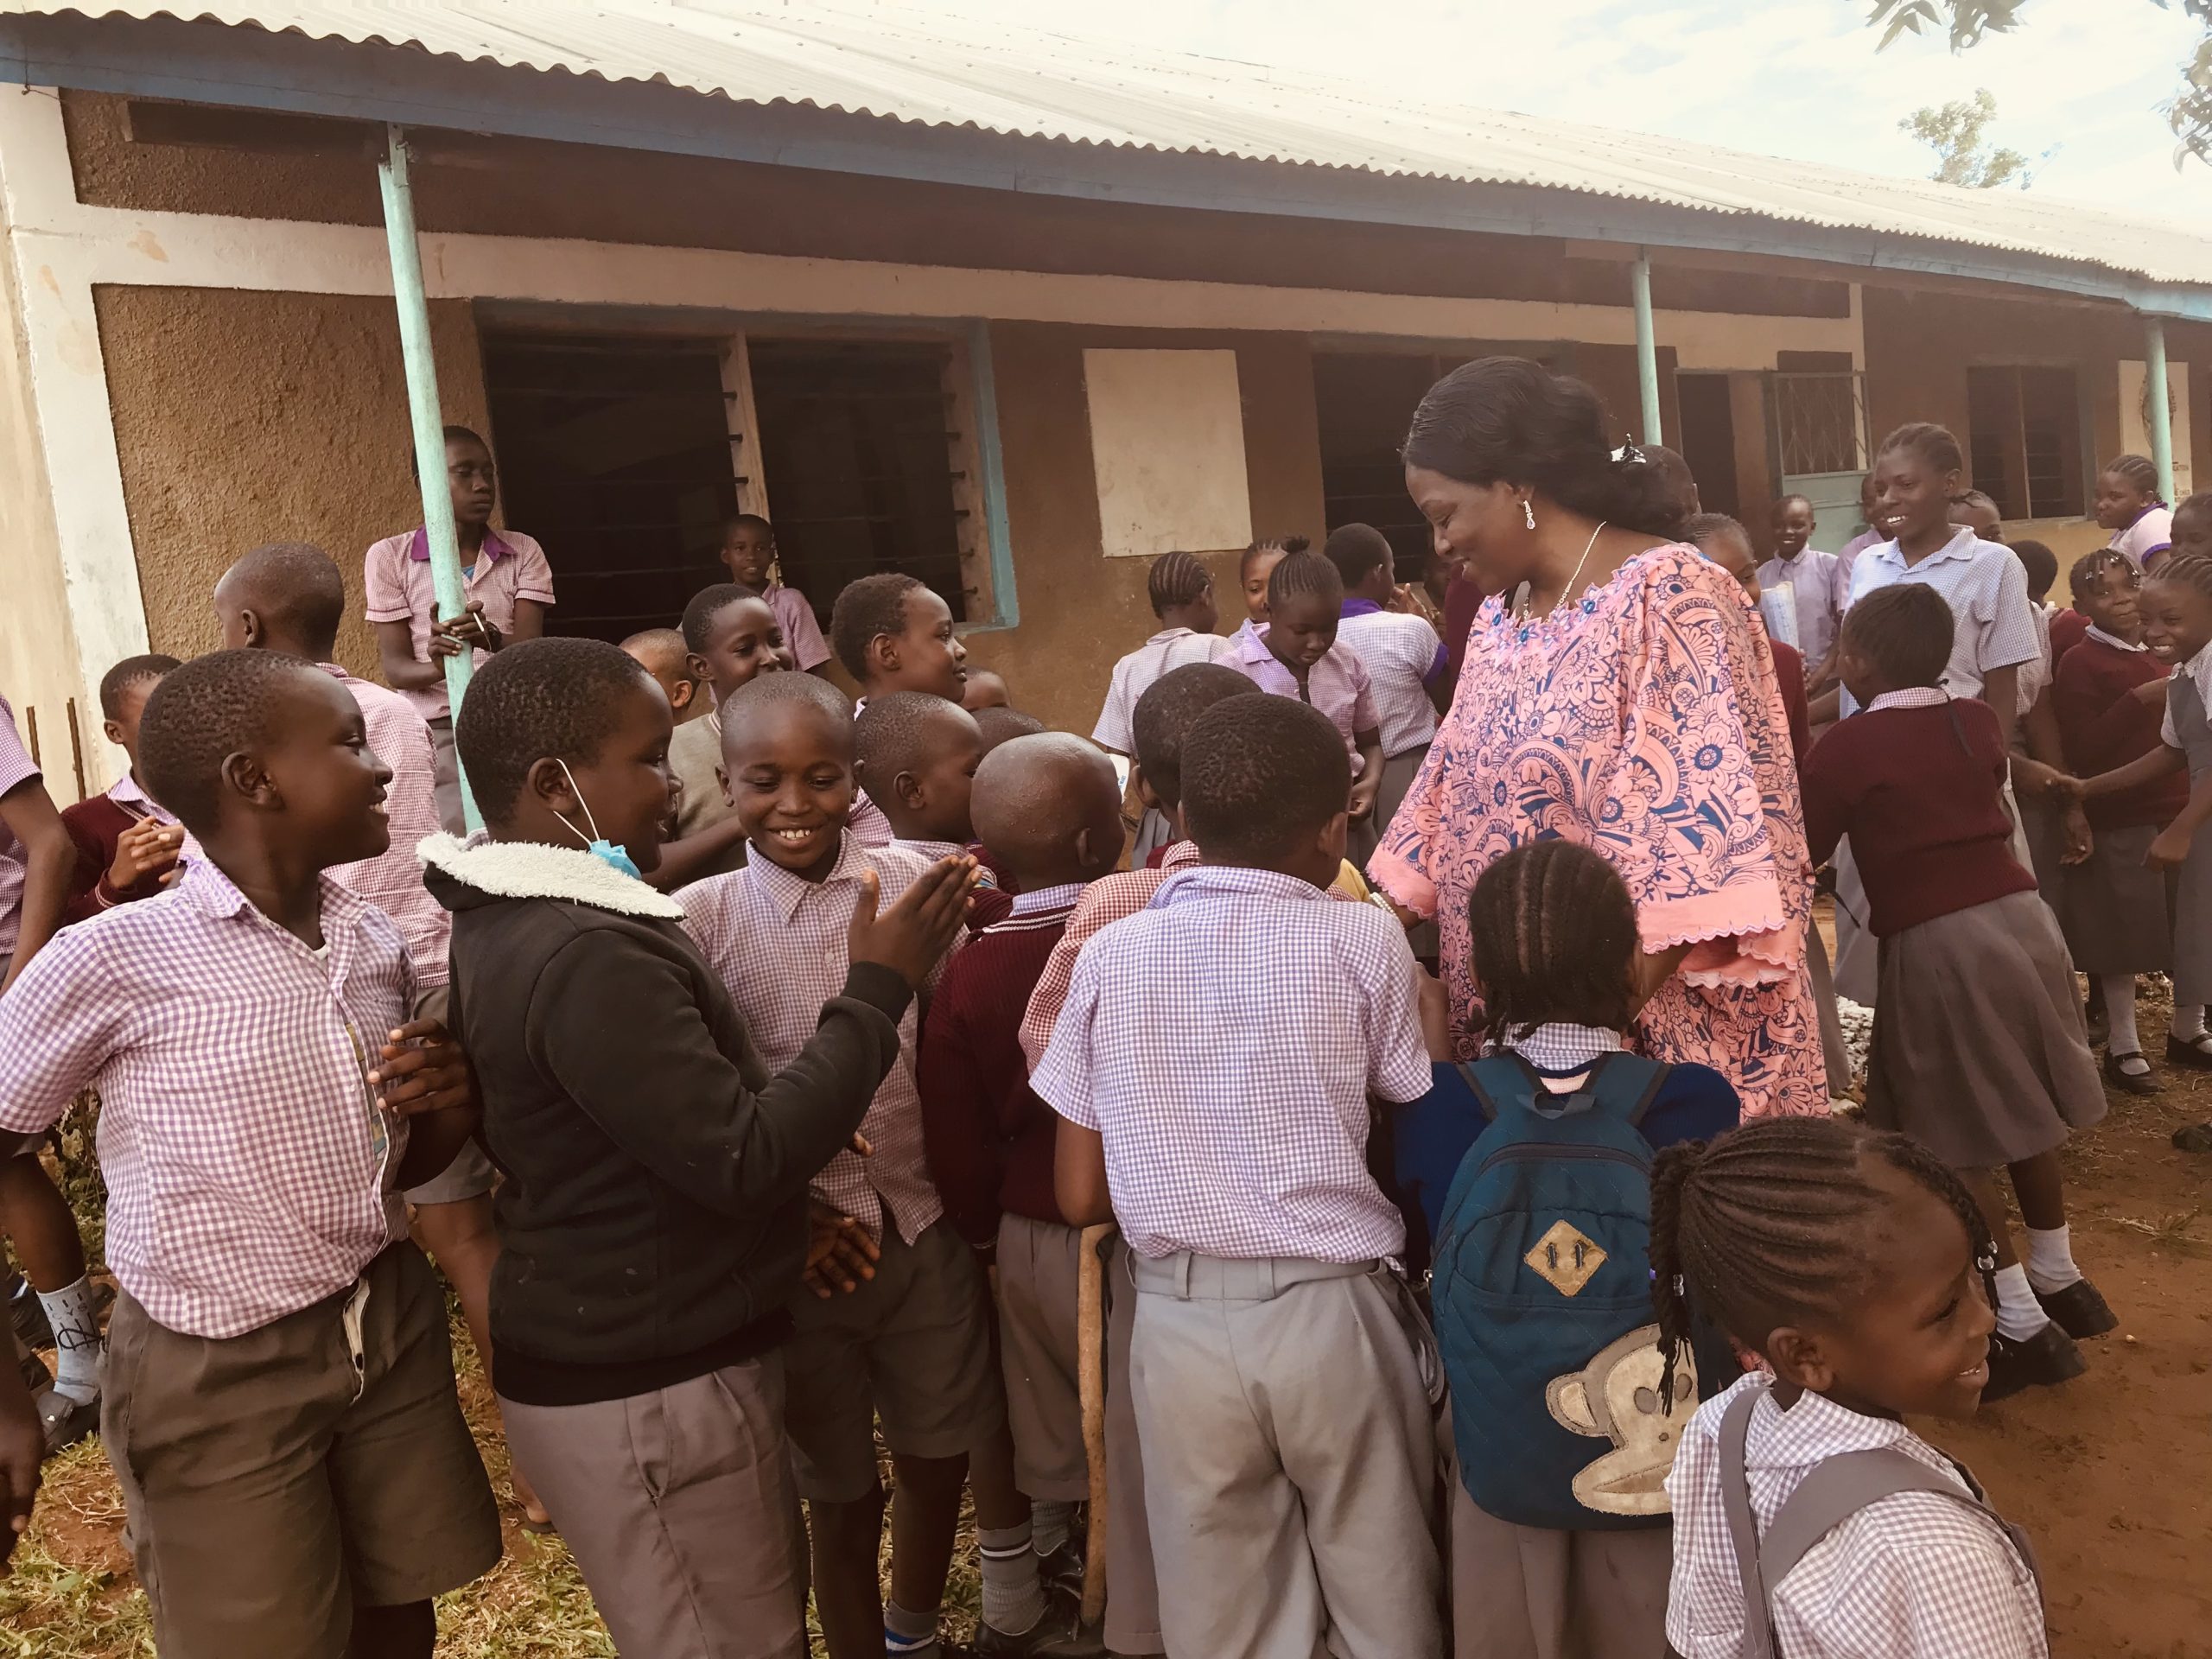 UA Little Rock Student and Missionary Mercy MacJones meets with school children during a mission trip in Mombasa, Kenya.